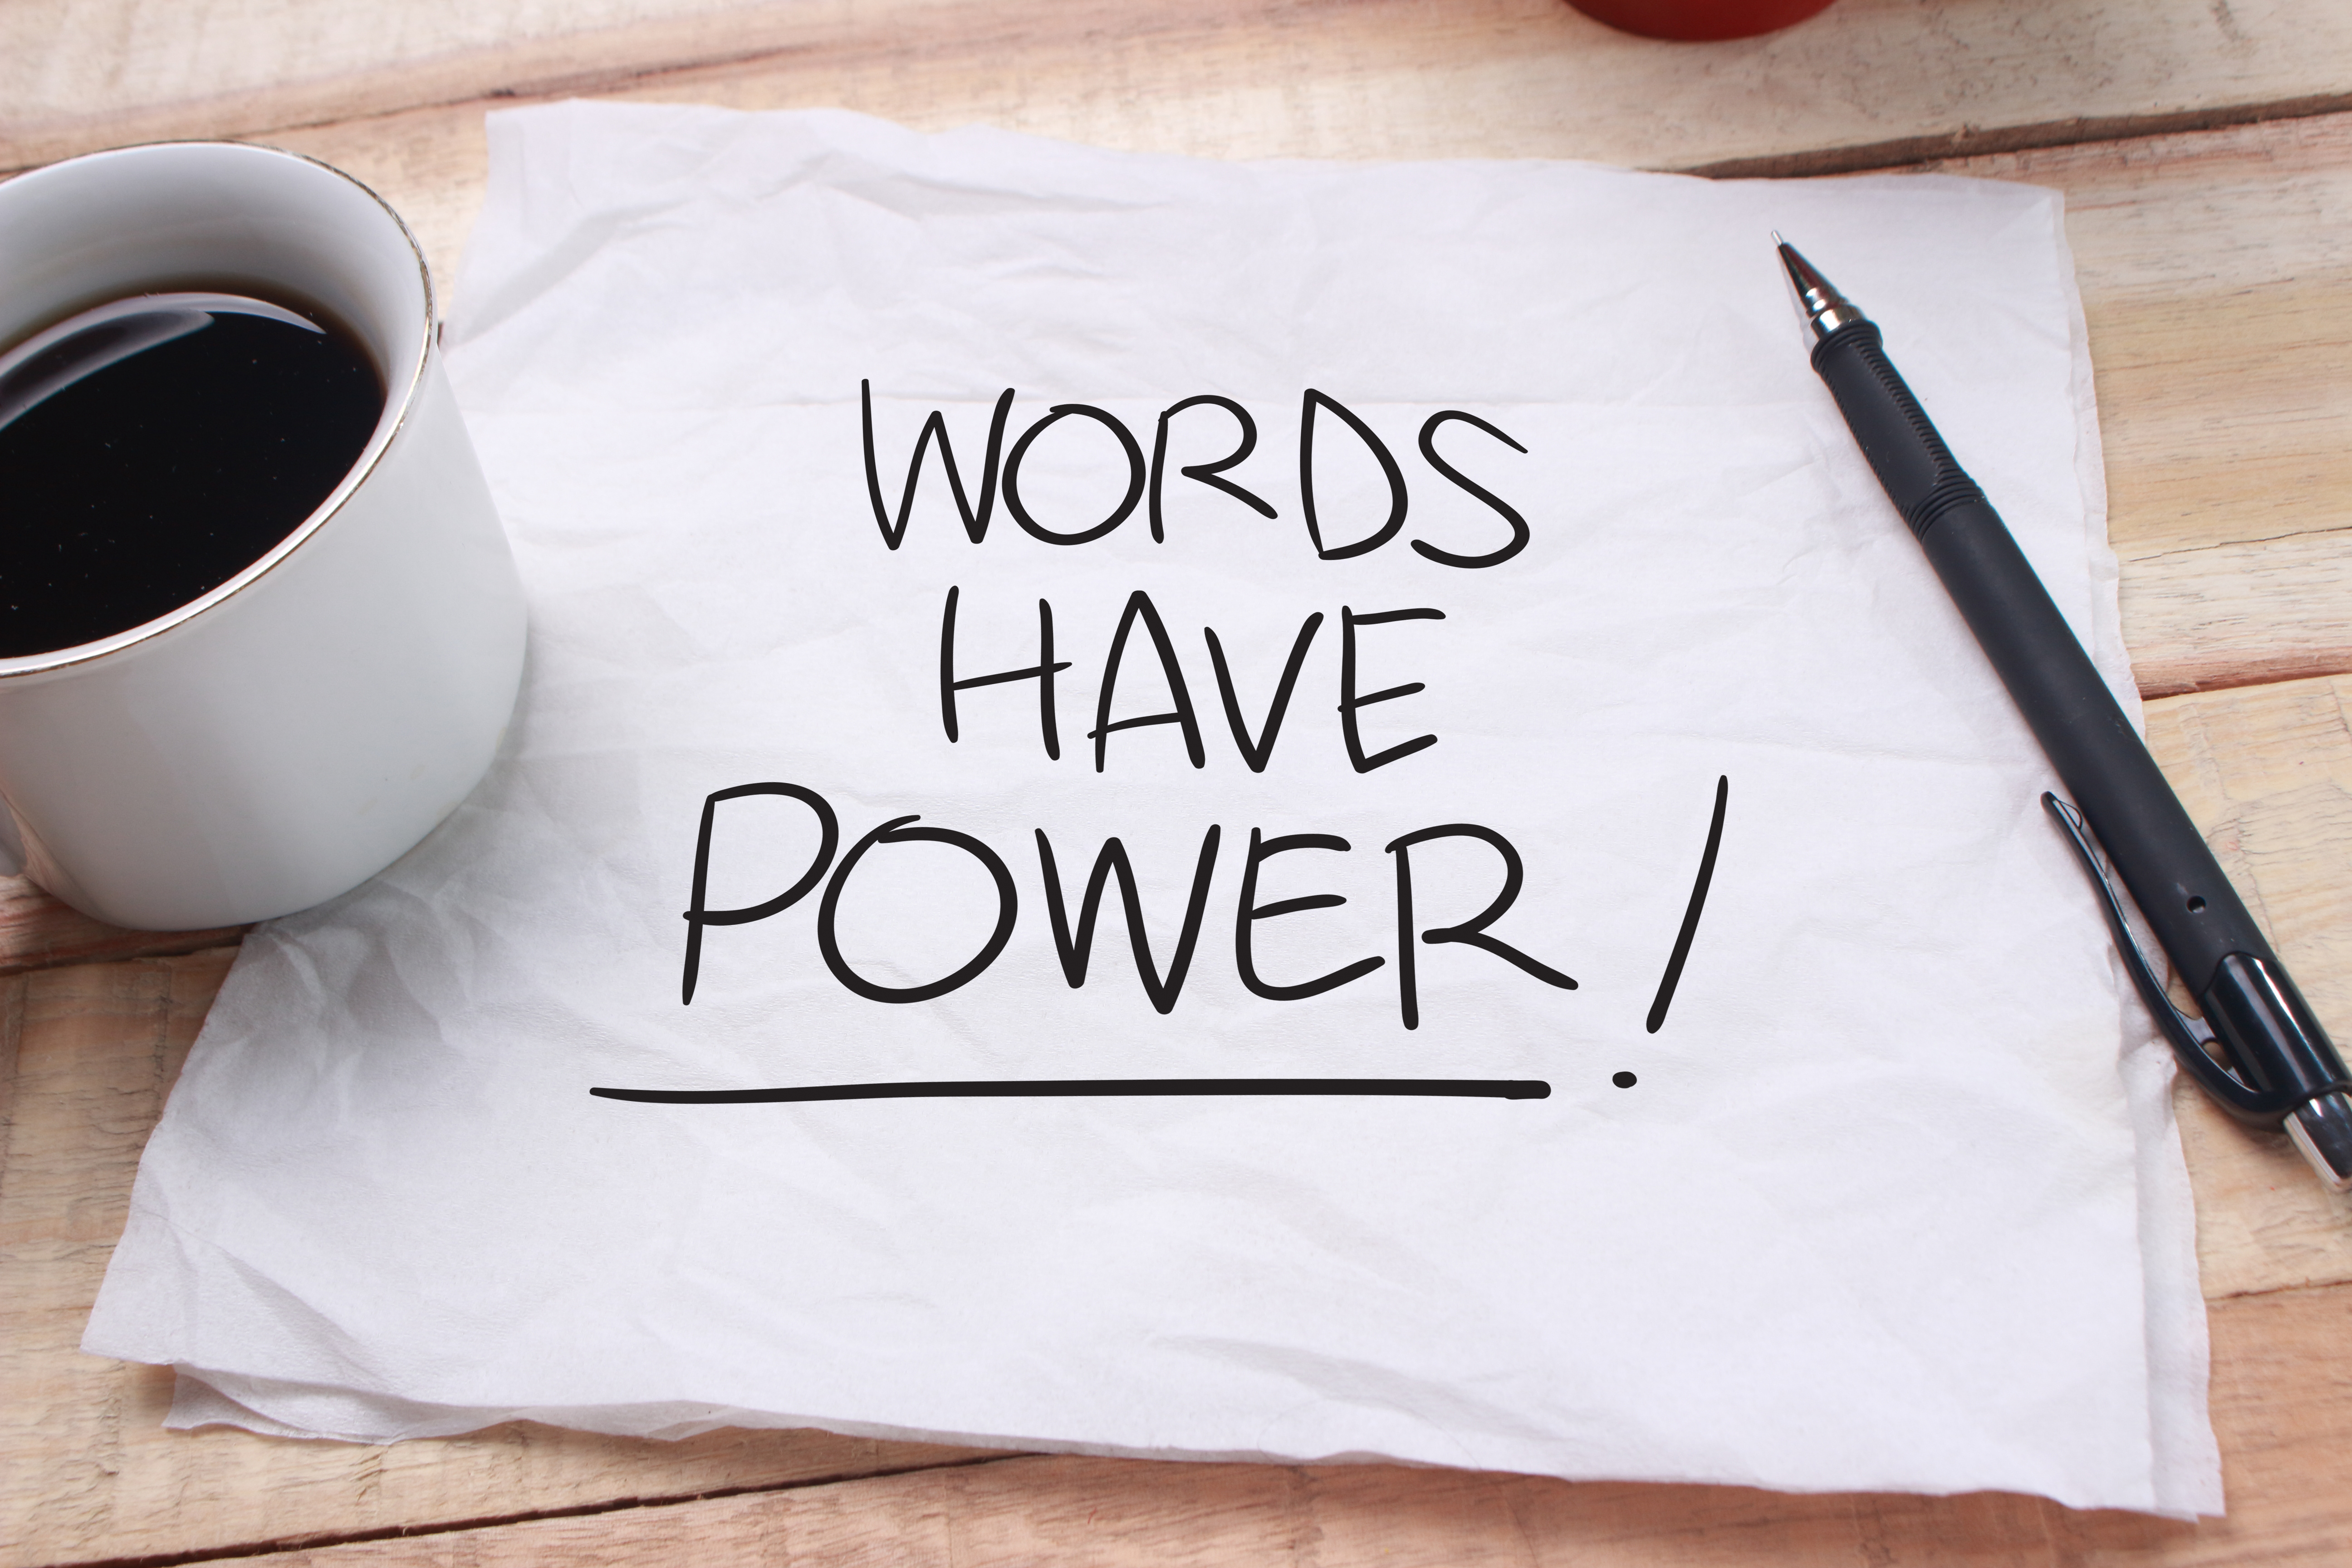 A cup of coffee and a pen are placed on a paper napkin with Words have Power! written on it.